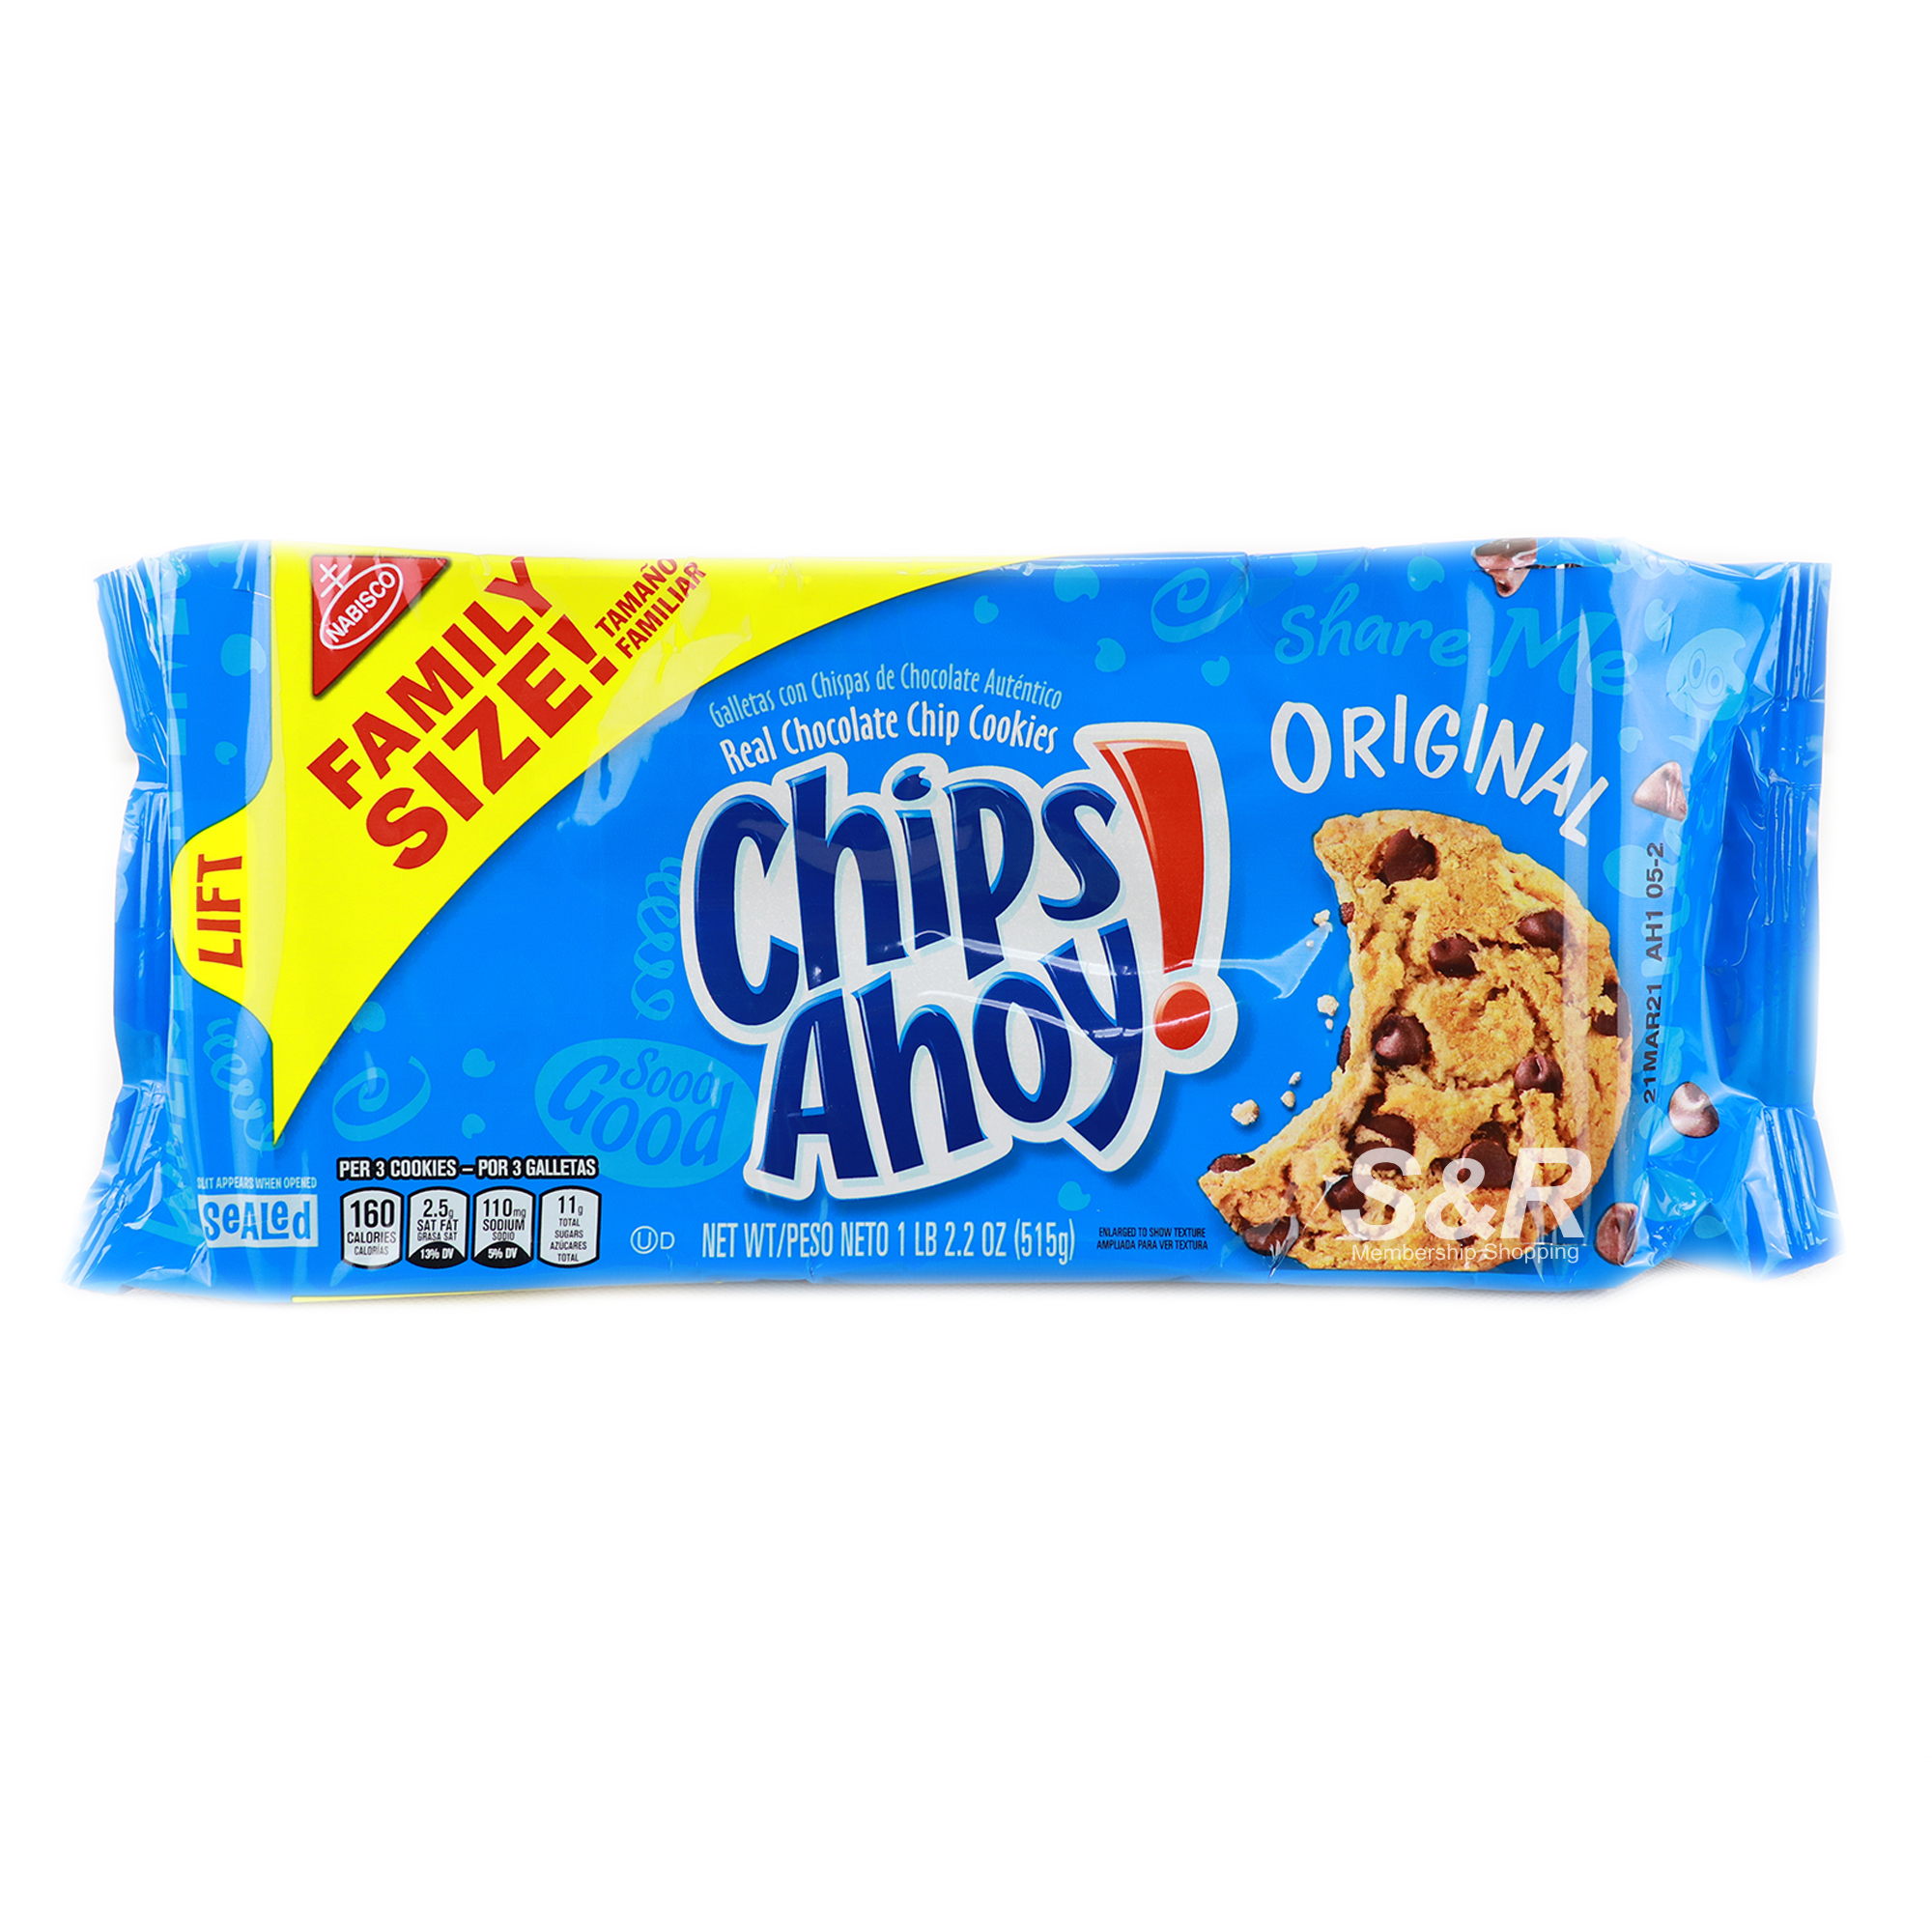 Chips Ahoy Original Chocolate Chip Cookies 515g